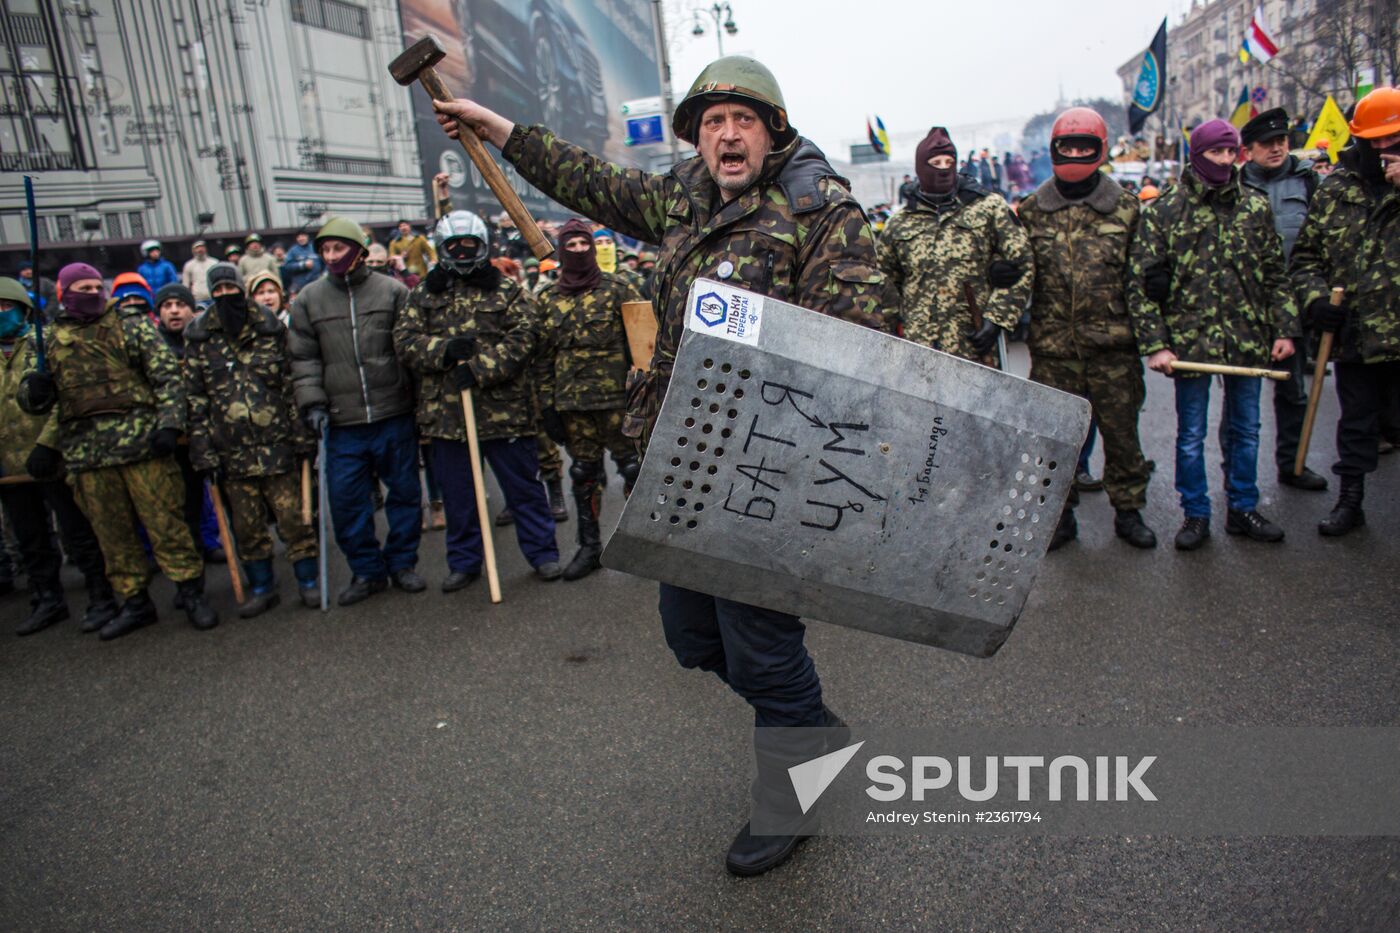 Mass protests in Kiev: Update